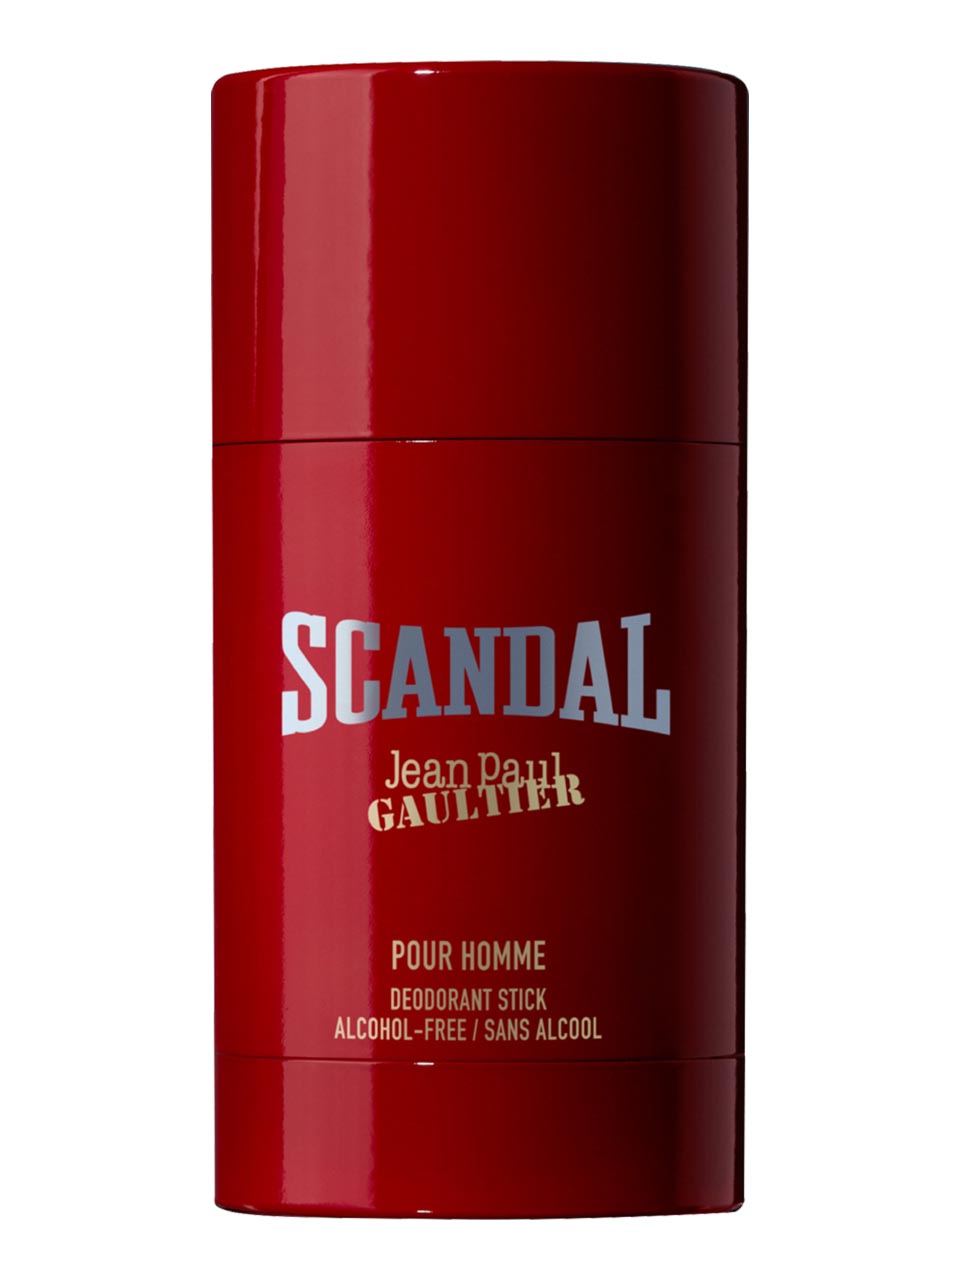 Jean Paul Gaultier Scandal for Him Deodorant Stick 75 g null - onesize - 1